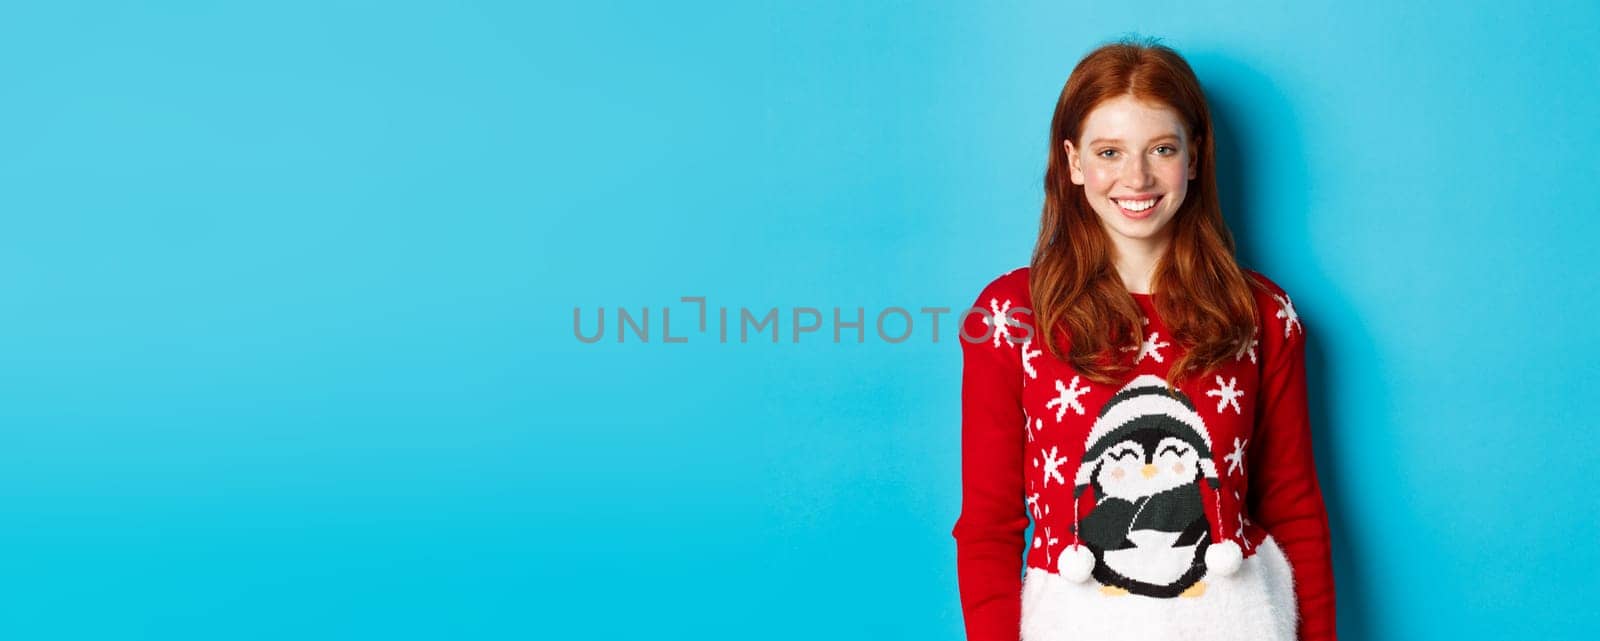 Winter holidays and Christmas Eve concept. Cute smiling teenage girl with red hair, wearing funny xmas sweater, standing against blue background.